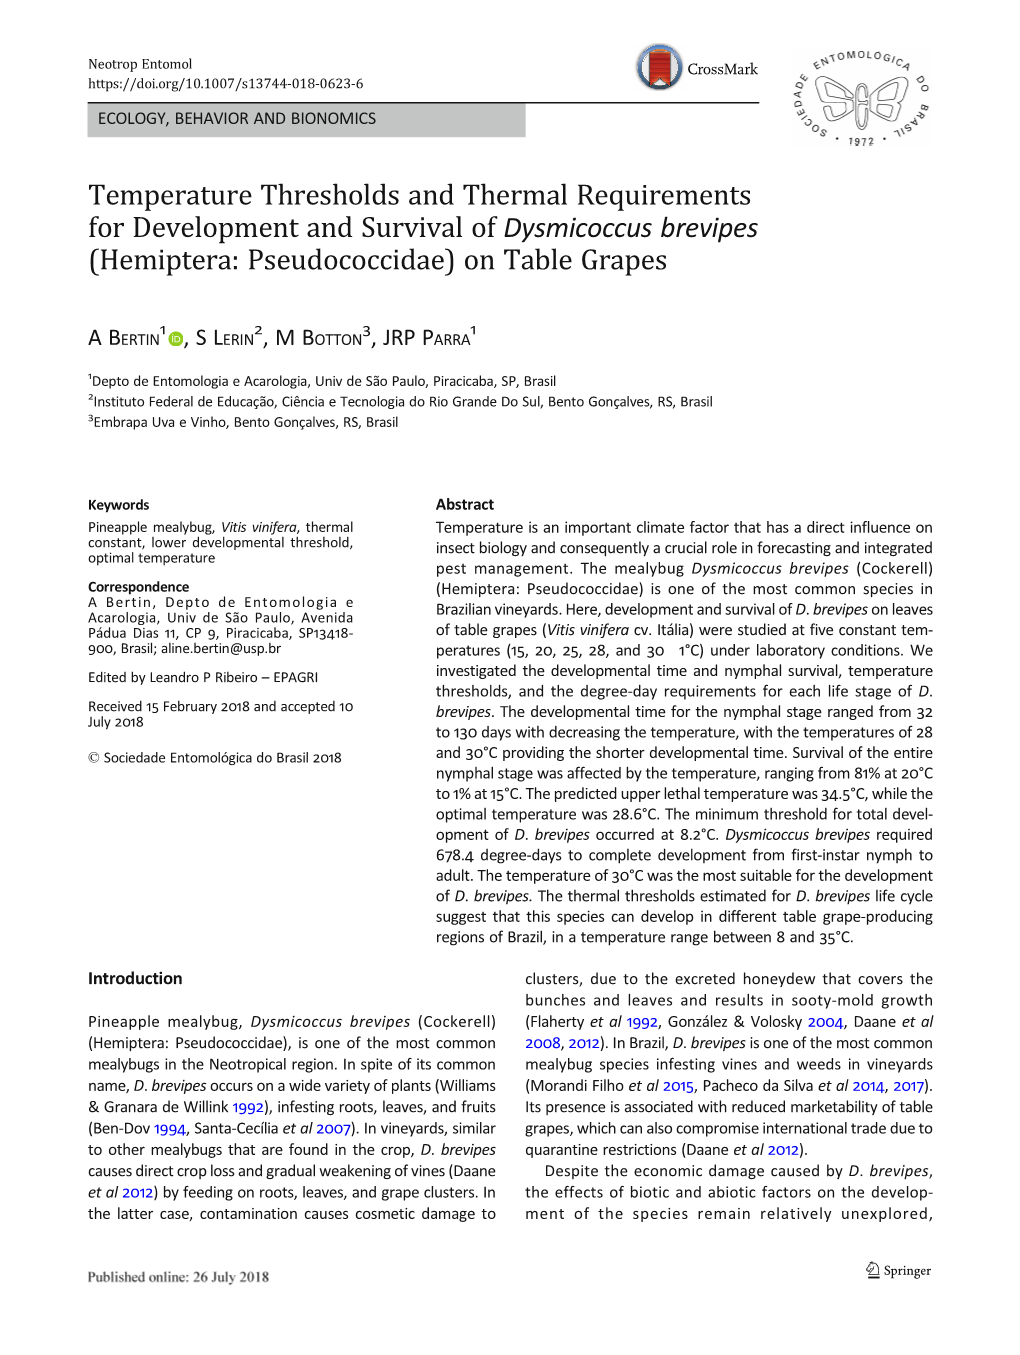 Temperature Thresholds and Thermal Requirements for Development and Survival of Dysmicoccus Brevipes (Hemiptera: Pseudococcidae) on Table Grapes